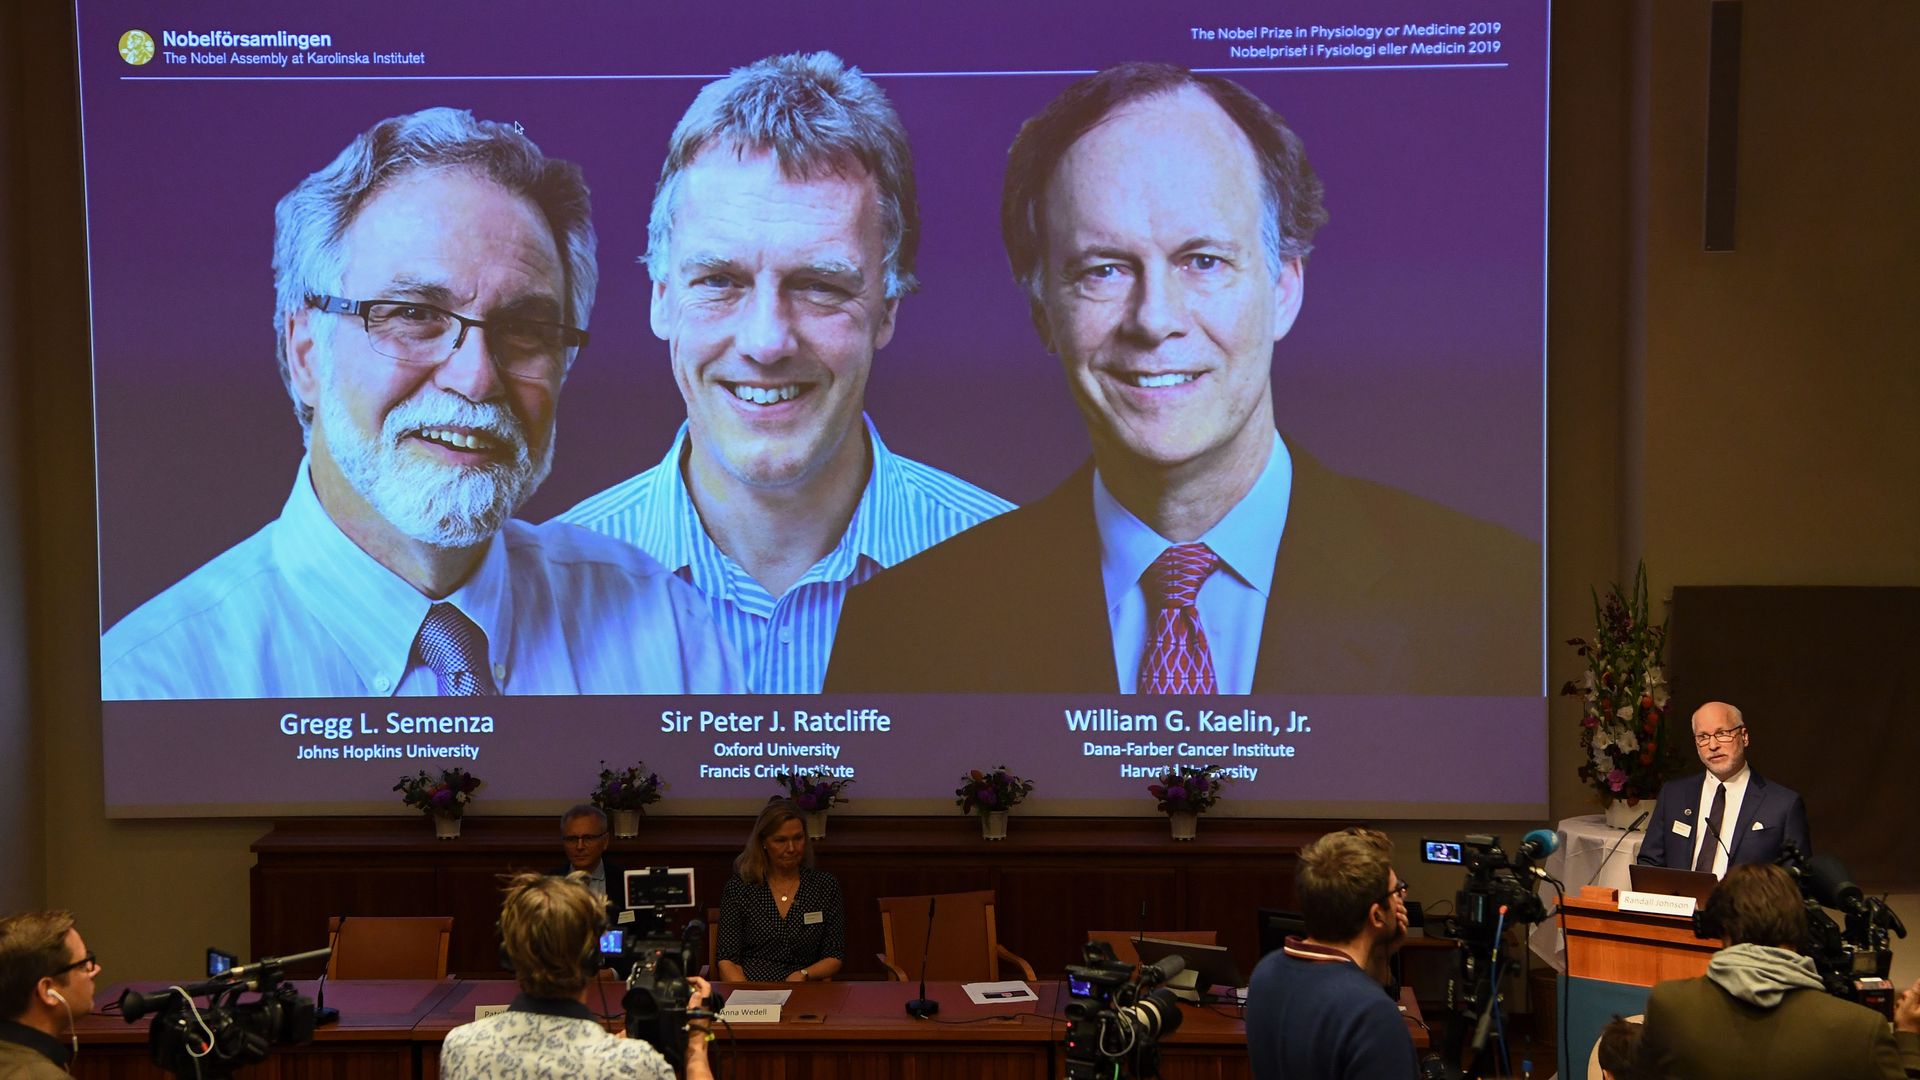 The Nobel Committee announces winners of the 2019 Nobel Prize in Physiology or Medicine.